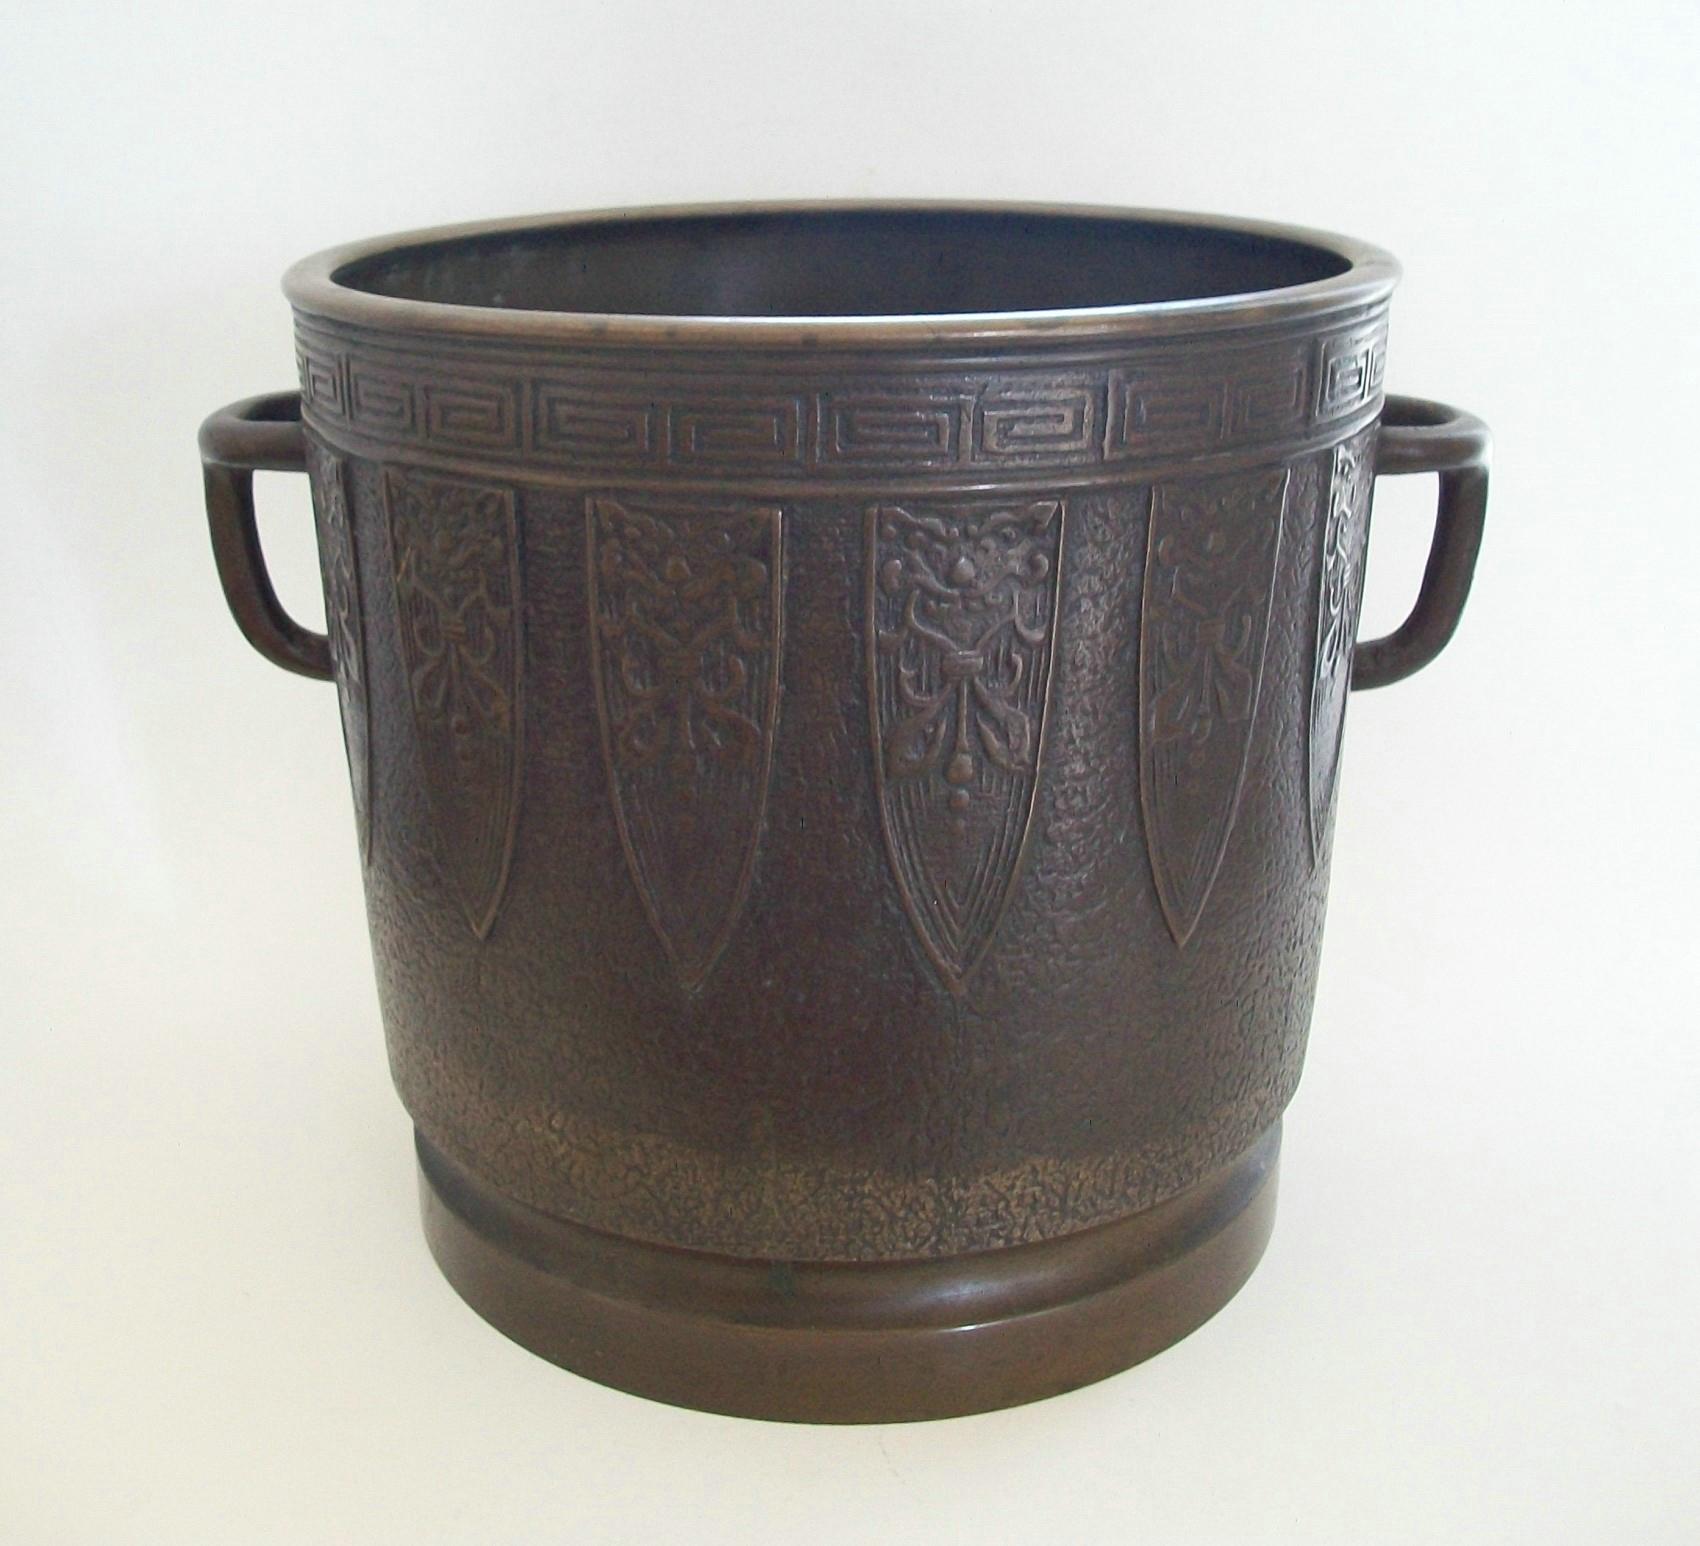 Archaic style antique bronze planter - large size - featuring fine casting with over-all textured finish, decorative elements and Greek key border to the rim - applied tripod handles - recessed base - original brown patina remains over-all - signed